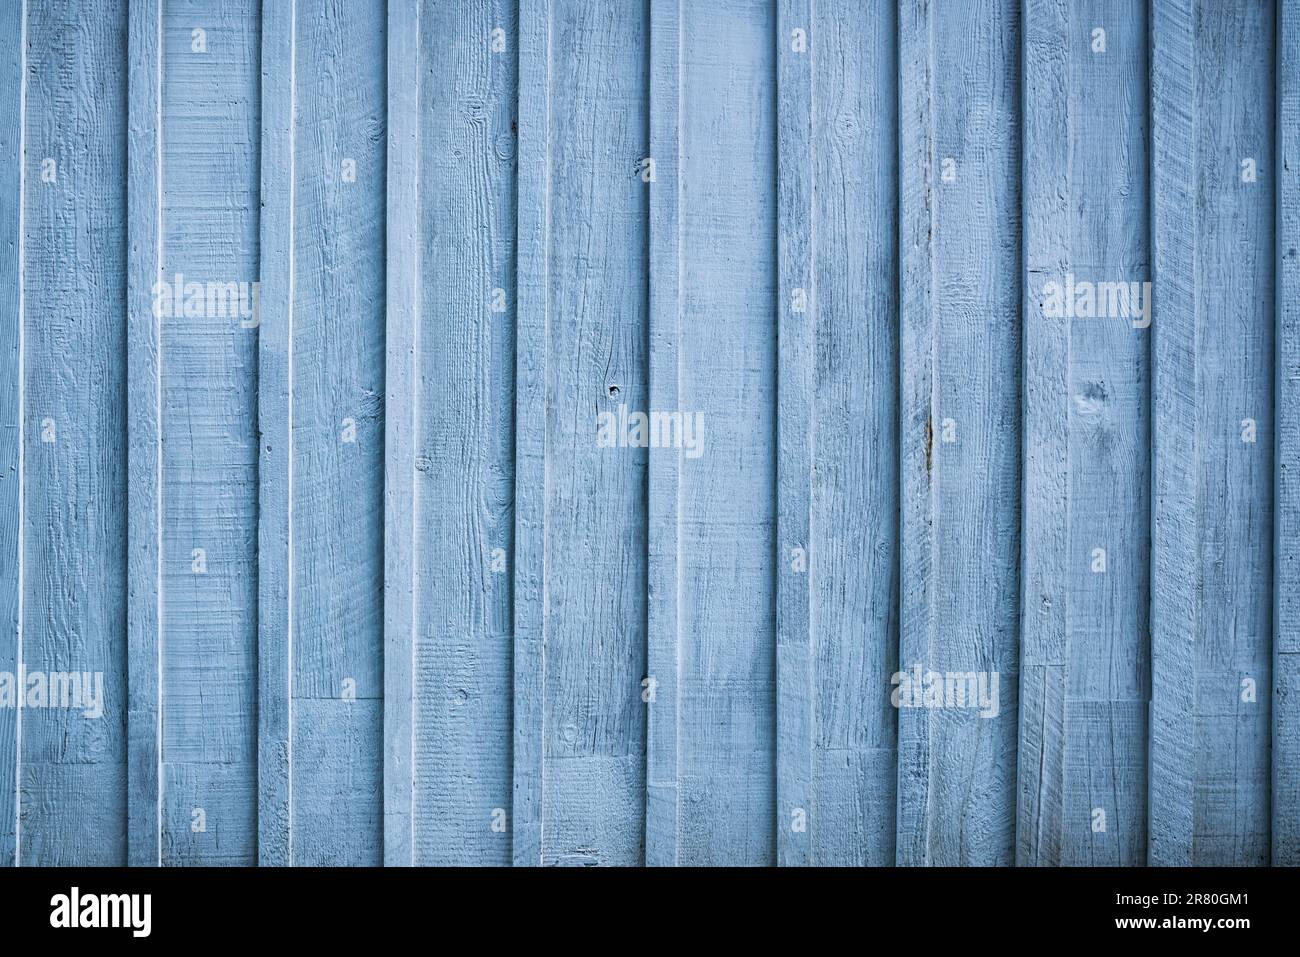 Rustic blue vertical wood plank  wall background Stock Photo